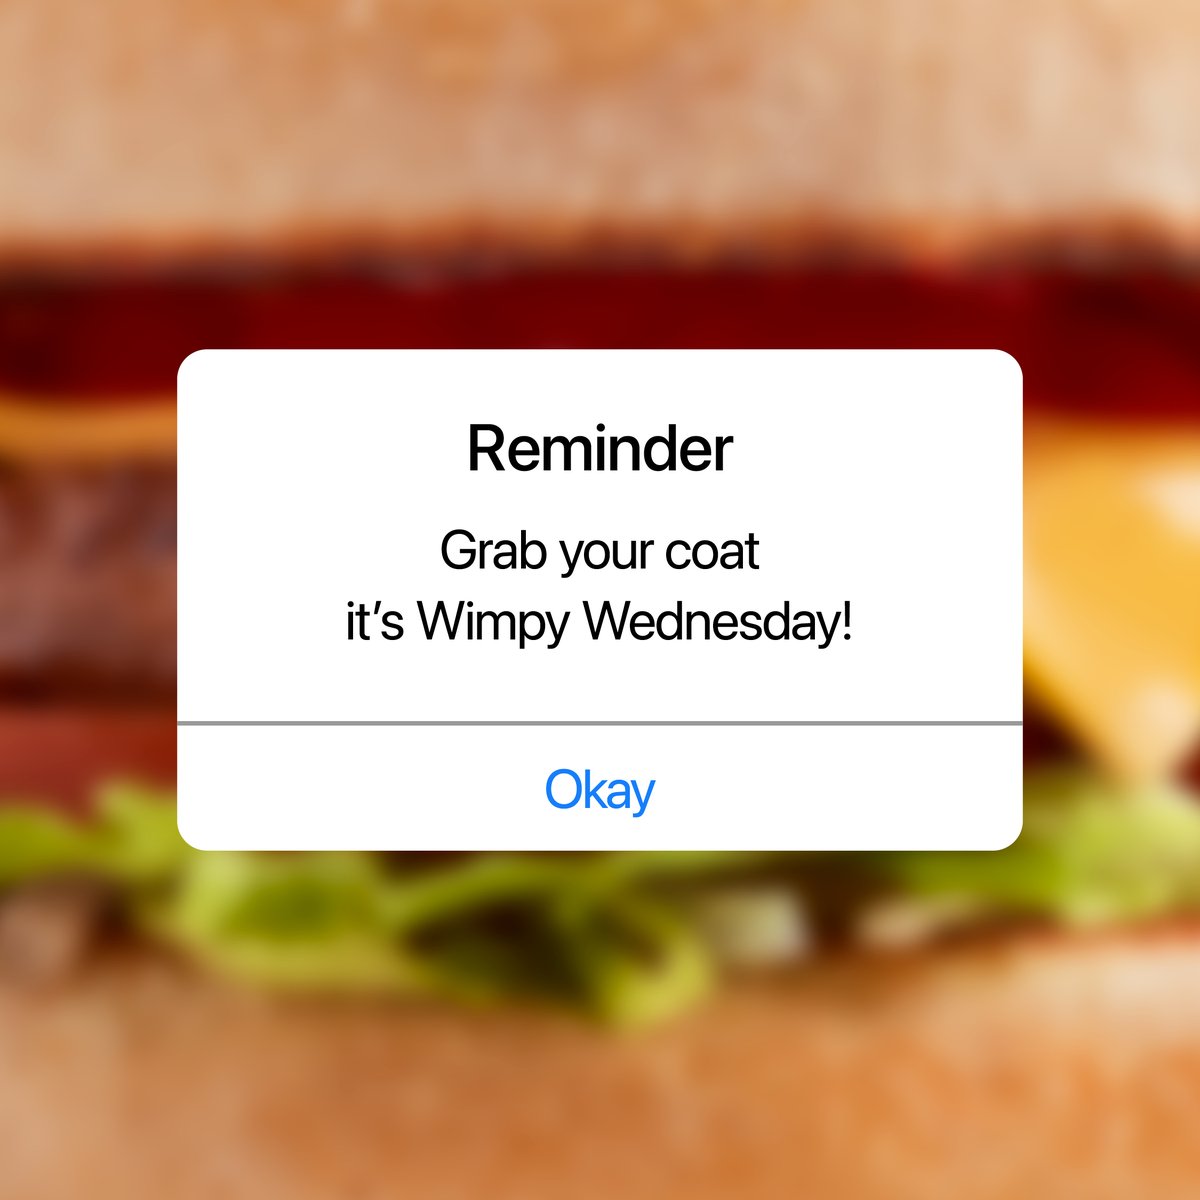 Reminder: Grab your coat it's Wimpy Wednesday! wimpy.uk.com/promotions/wim… *T&Cs apply #WimpyUK #HomeOfTheHamburger #WimpyBurger #WimpyMoment #ComeOnOverToOurPlace #WimpyWednesday